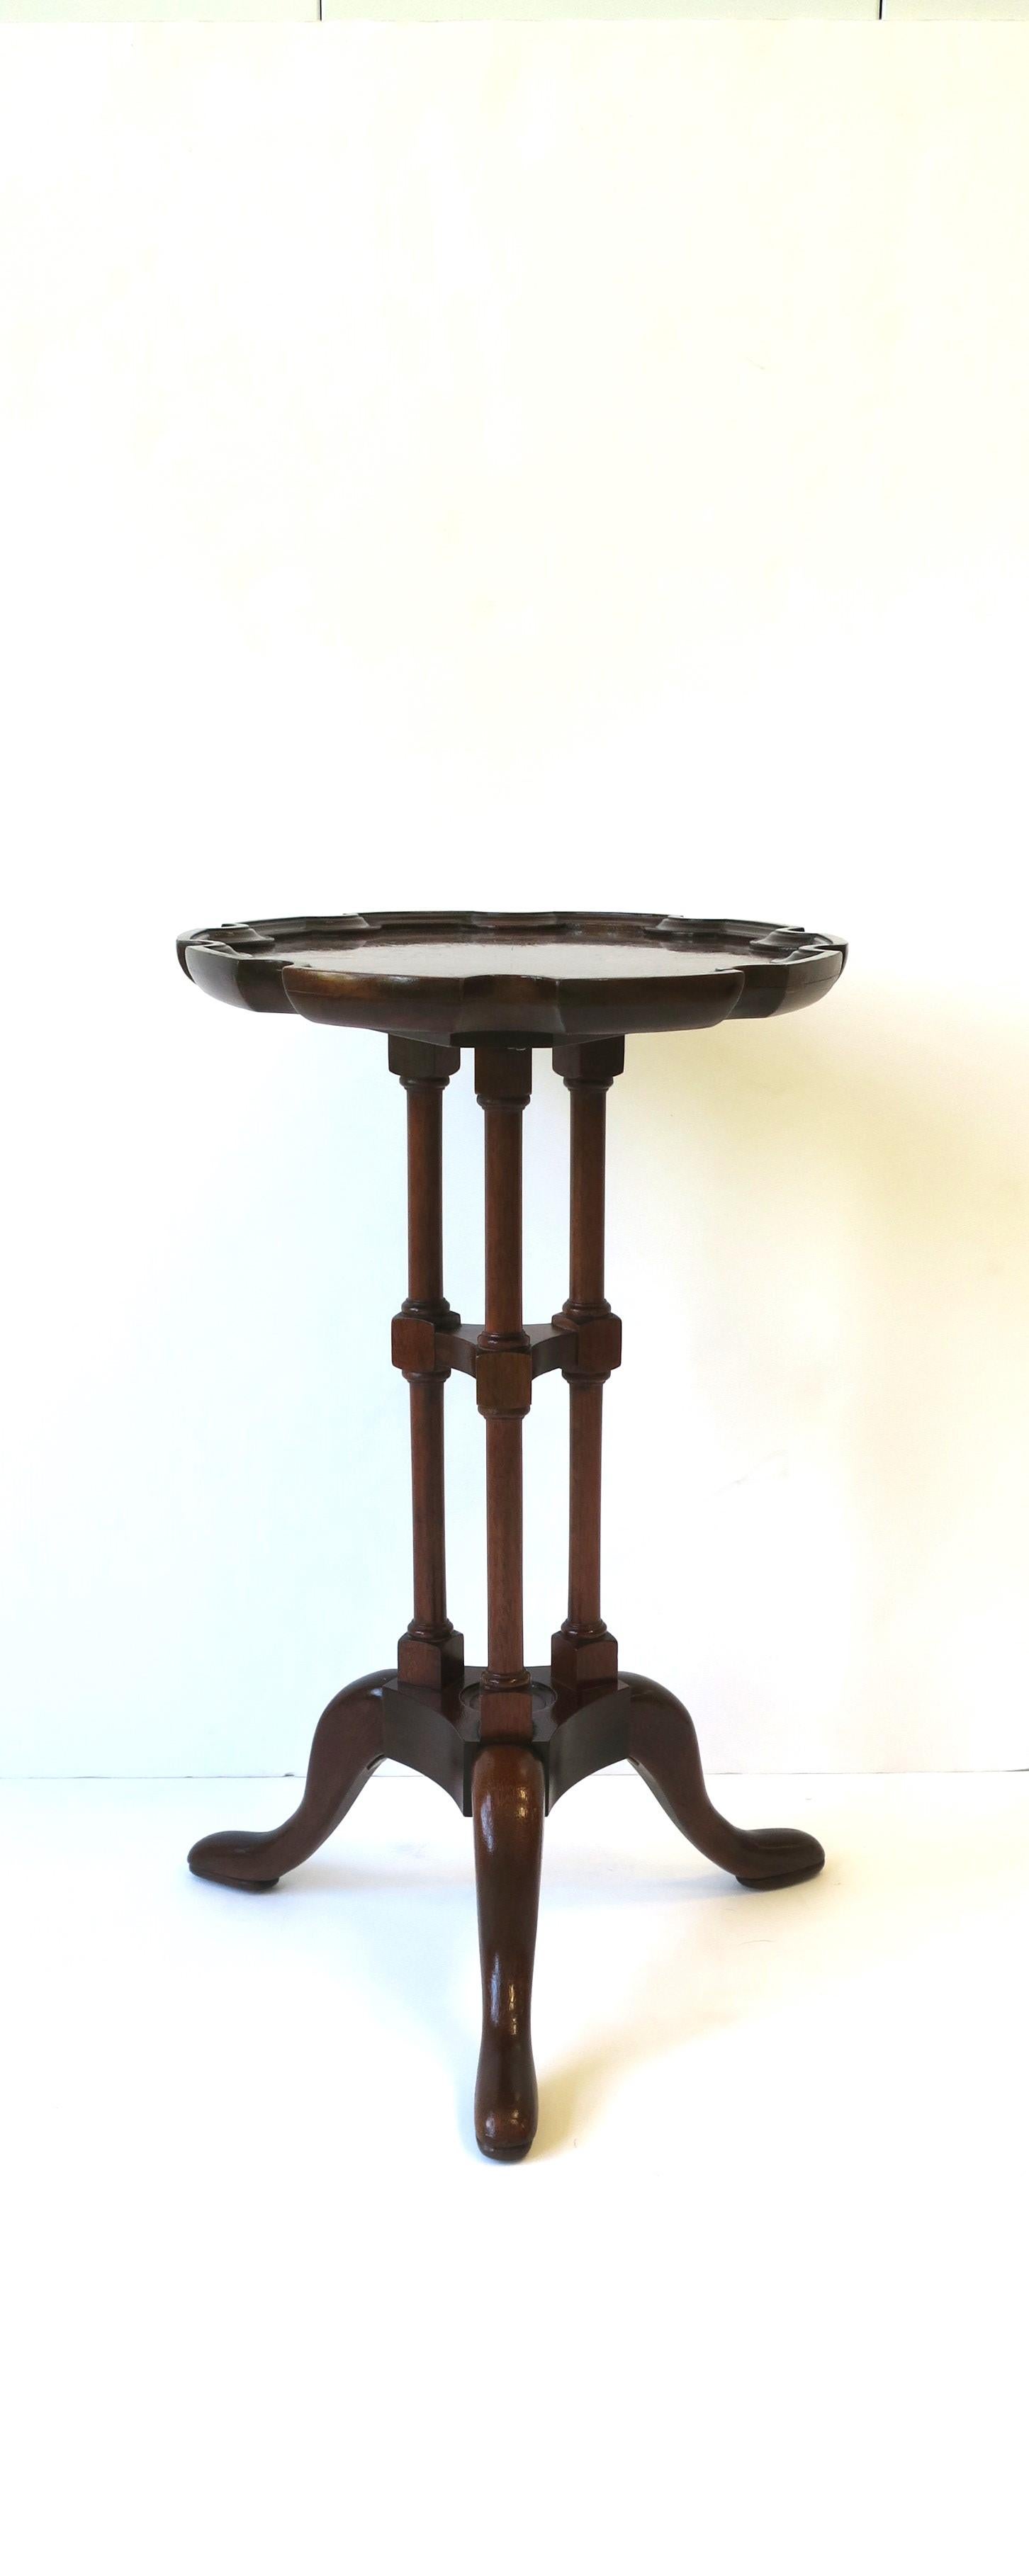 A rich brown burled walnut top side drinks table by Baker Furniture Co. Charleston Historic Collection in the Victorian/Queen Anne design style, circa late-20th century, USA. Table has a beautiful, detailed burled walnut top with decorative edge and